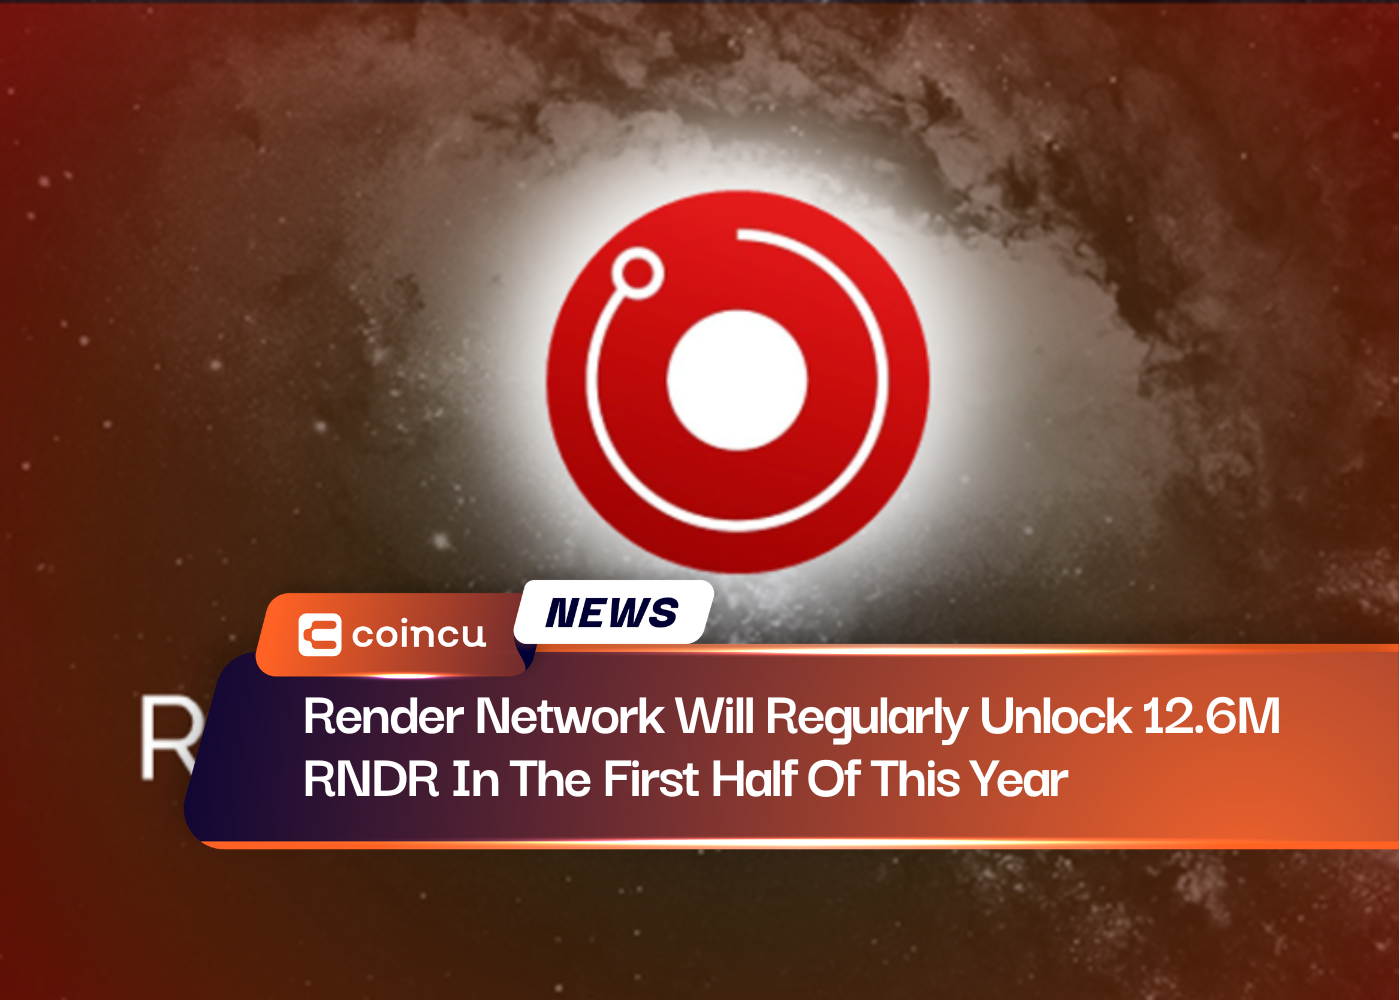 Render Network Will Regularly Unlock 12.6M RNDR In The First Half Of This Year